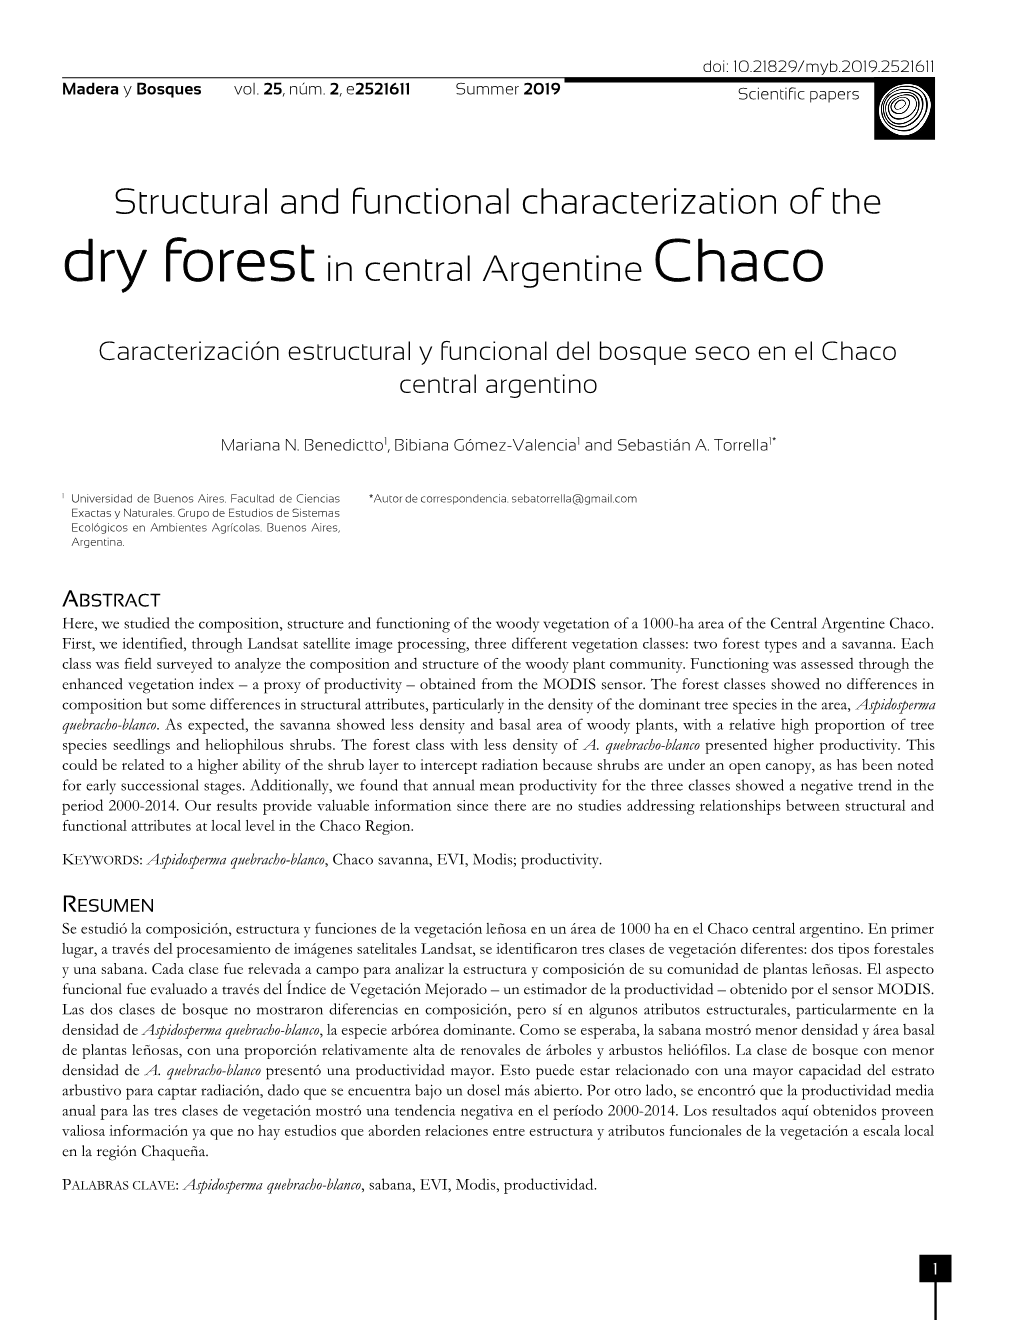 Structural and Functional Characterization of the Dry Forestin